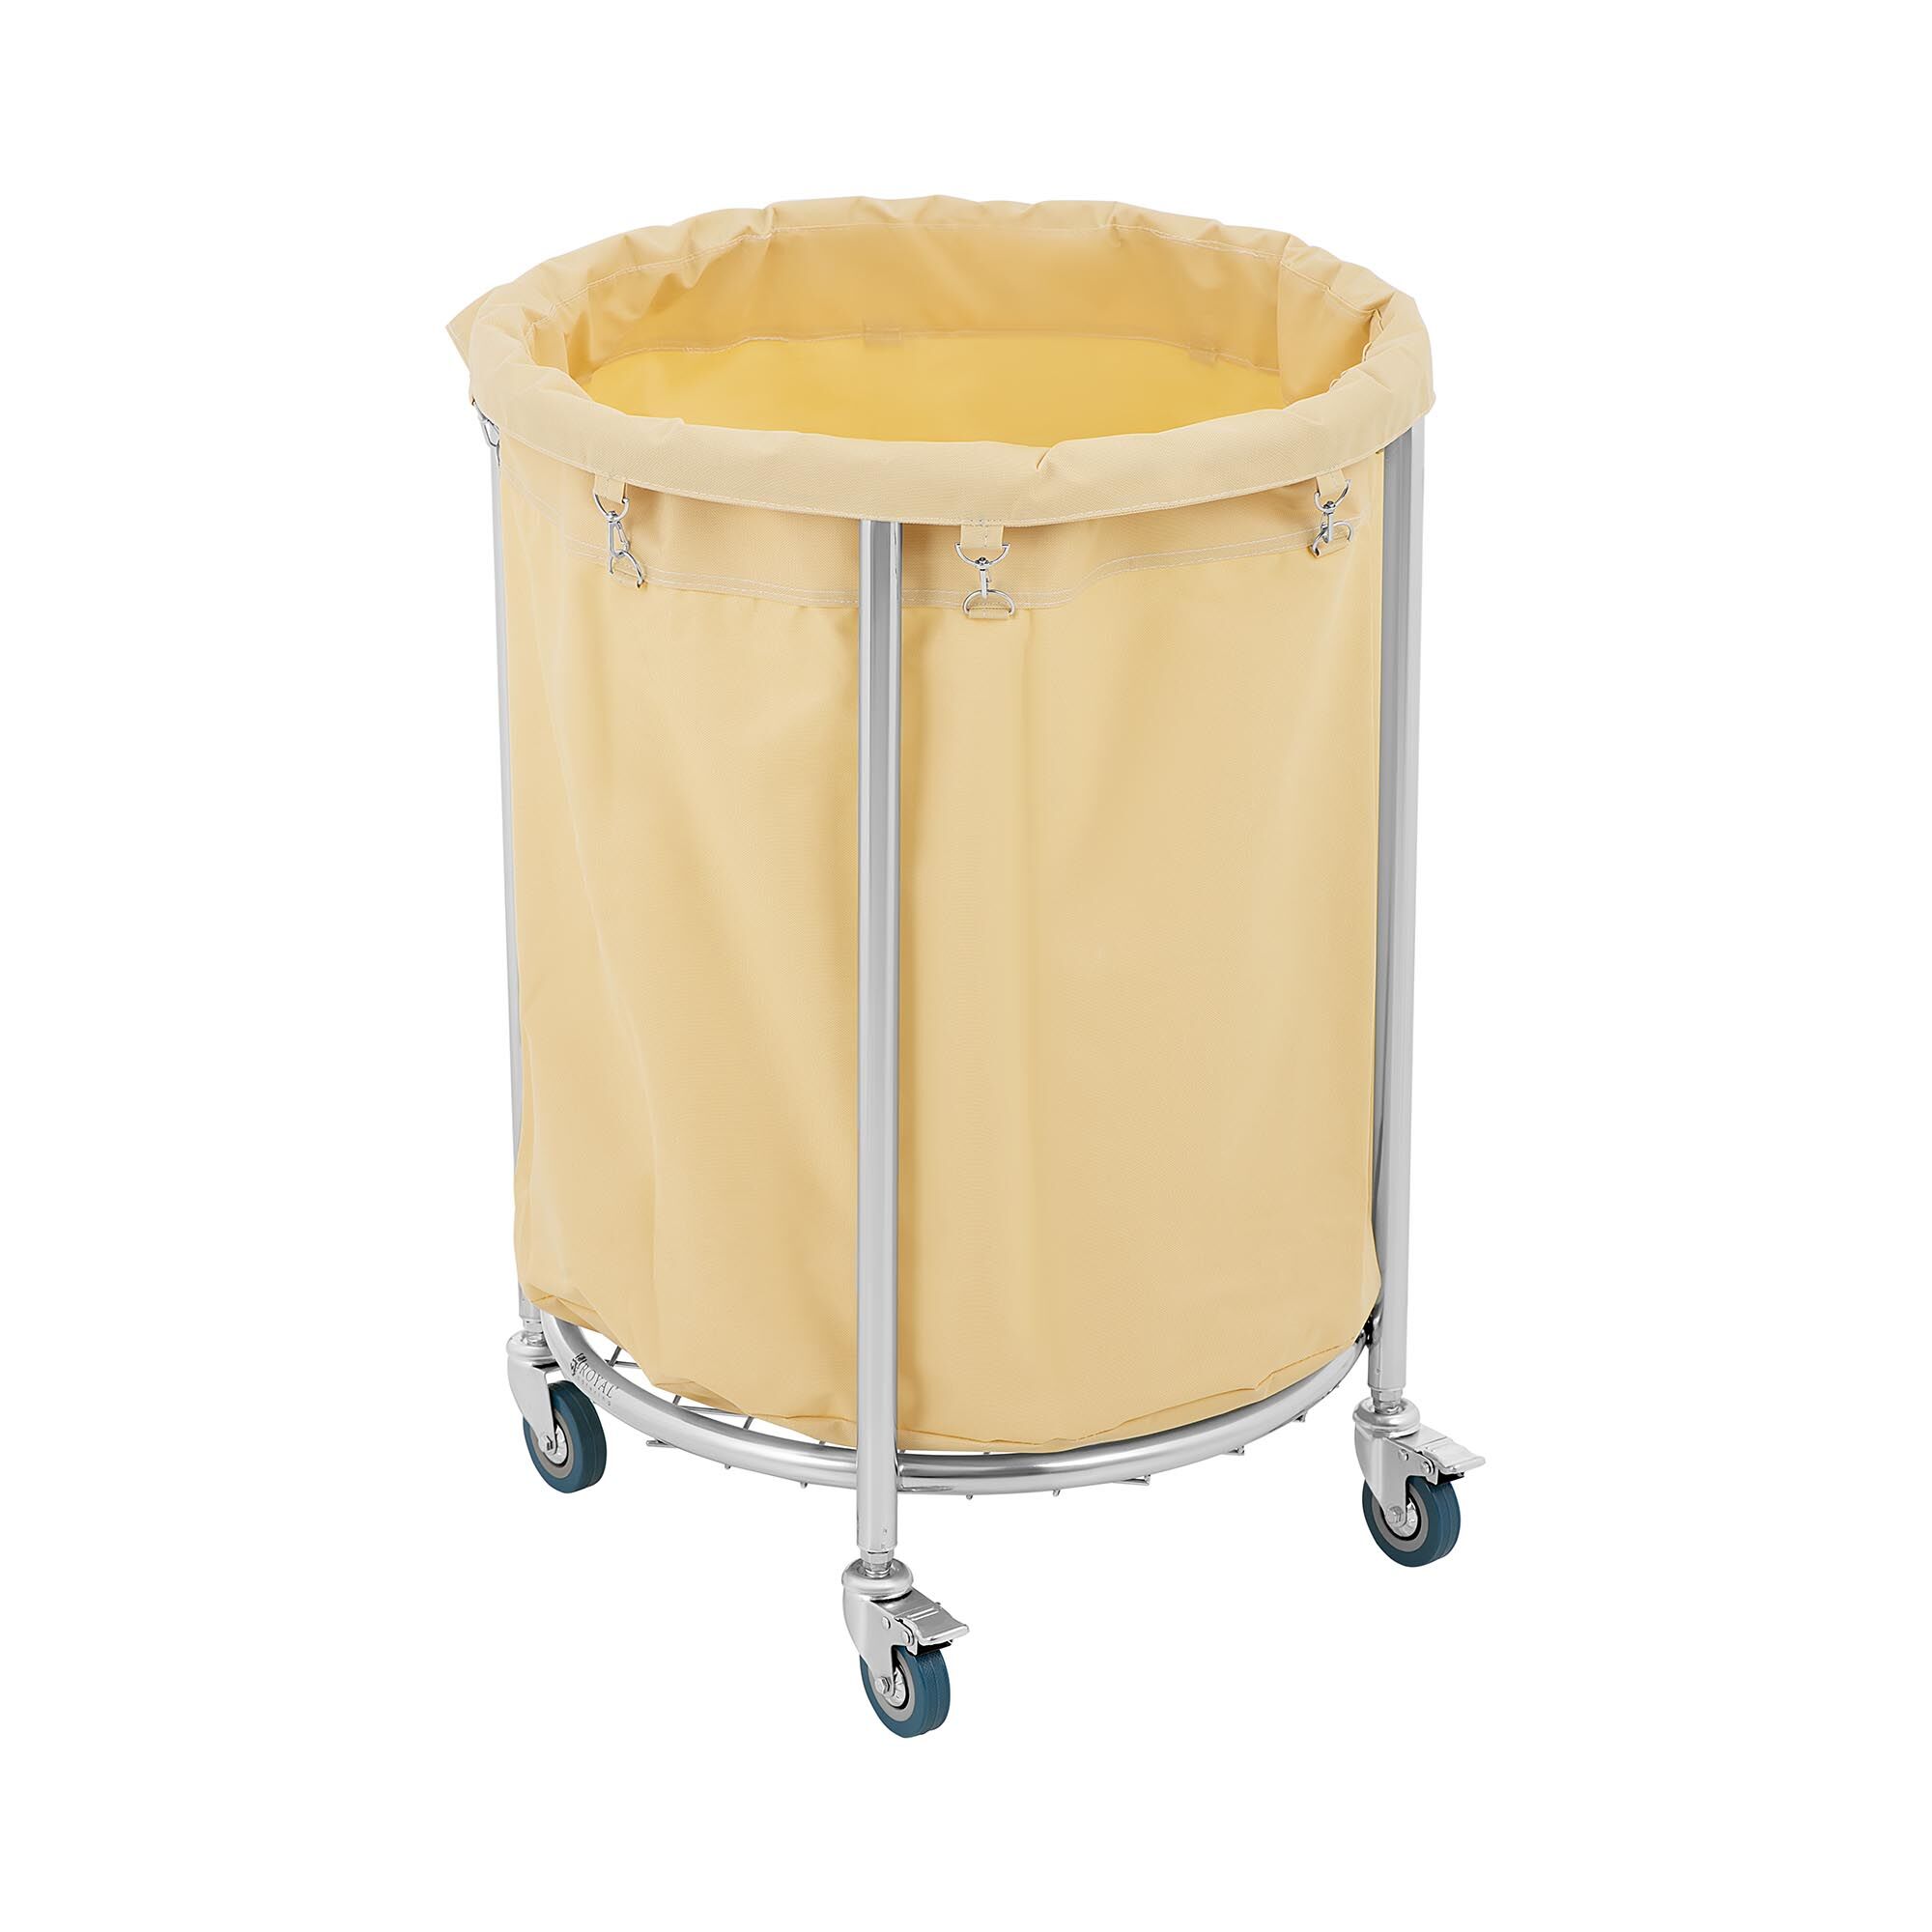 Royal Catering Laundry Sorter - 230 Litres